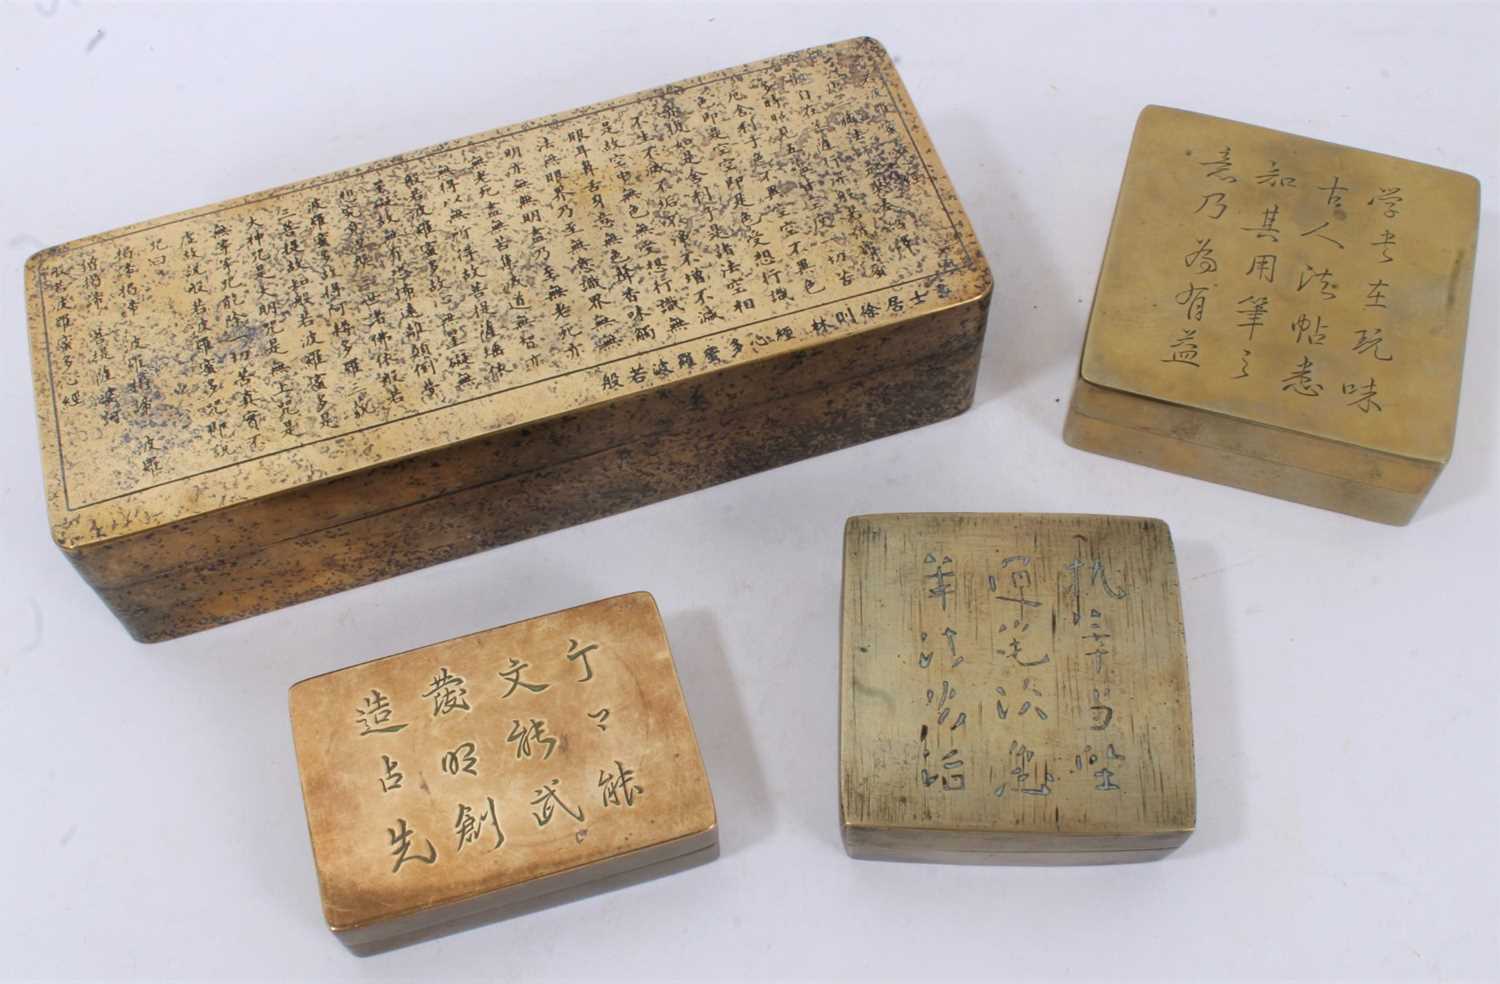 Large Chinese paktong ink box with ornate script panel and gold splash ornament, 19cm long, together